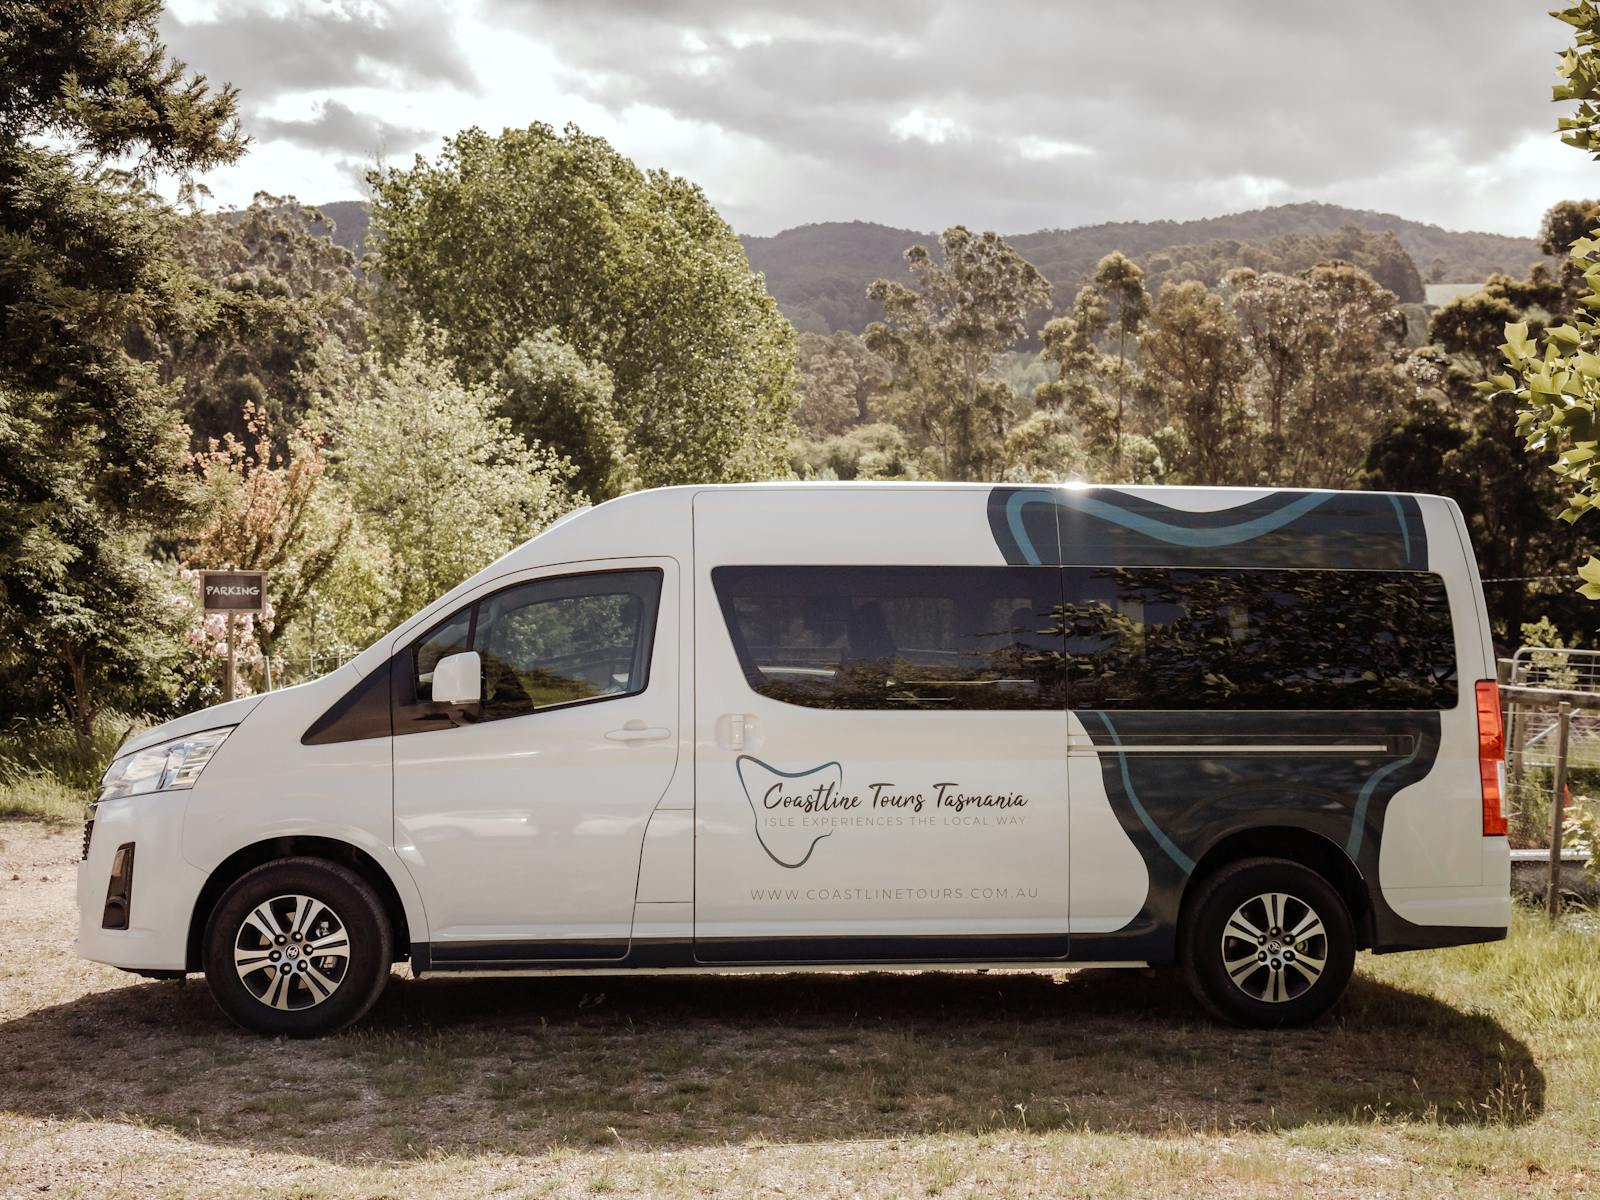 Luxury and comfort await in our new 11-seater van with Coastline Tours Tasmania